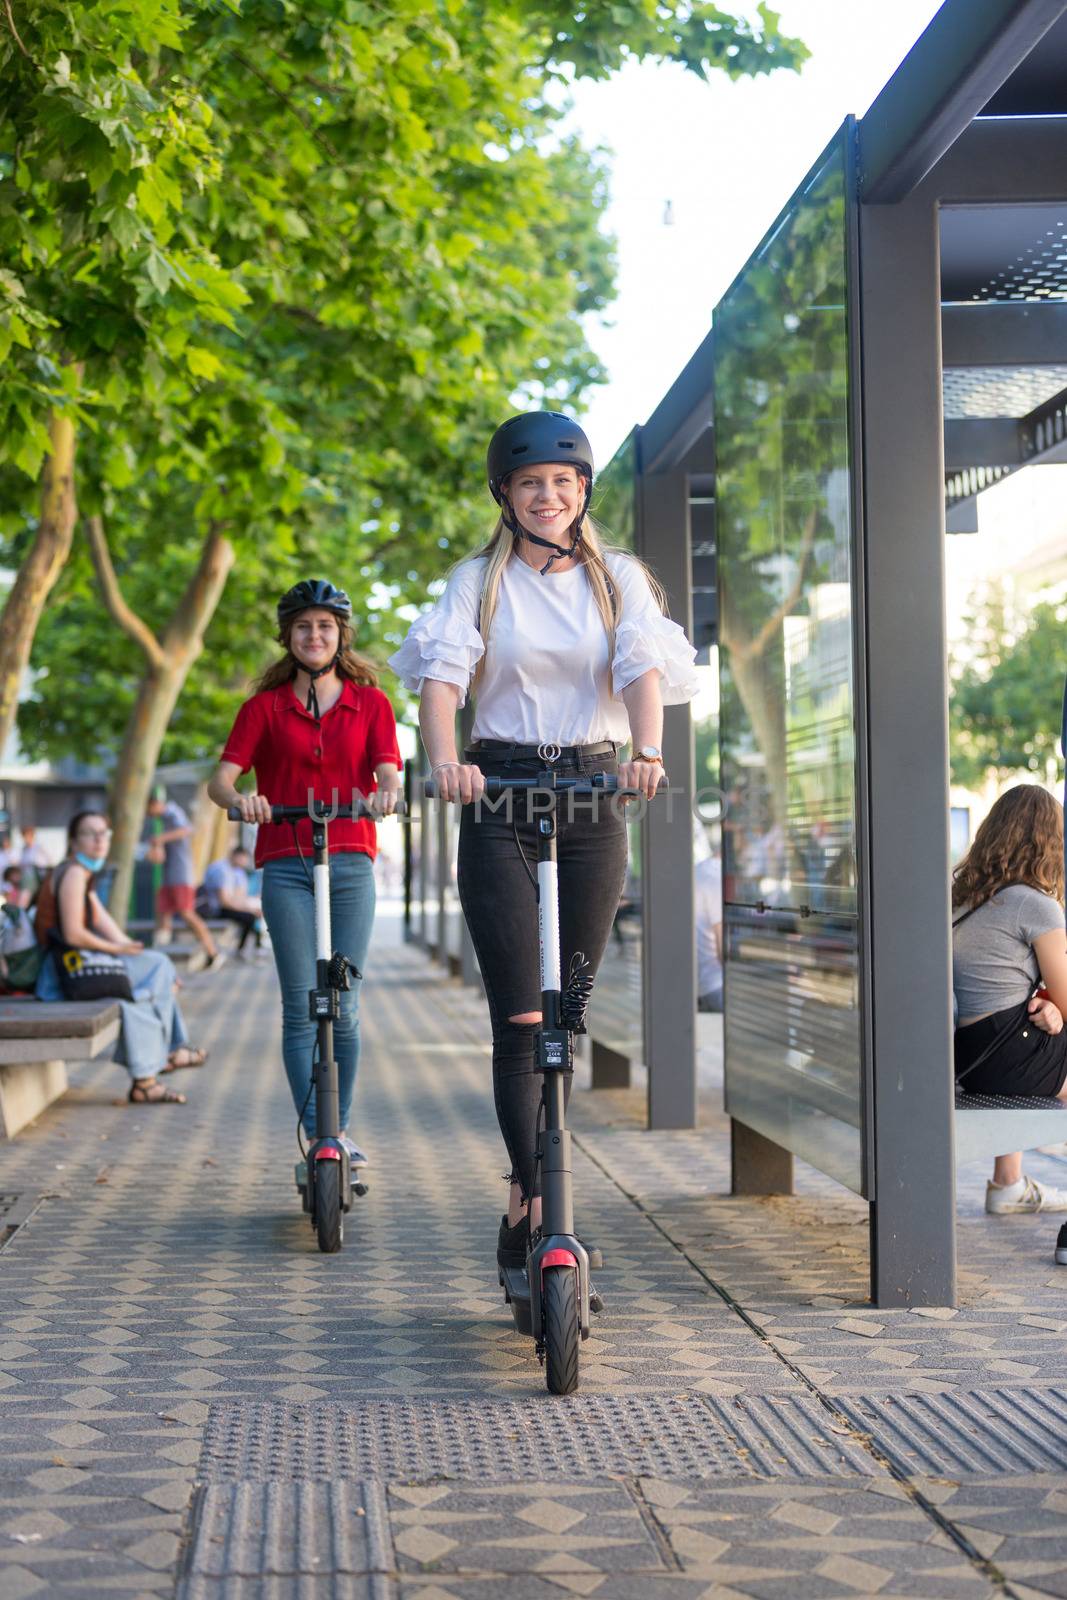 Trendy fashinable teenager girls riding public rental electric scooters in urban city environment. Eco-friendly modern public city transport.